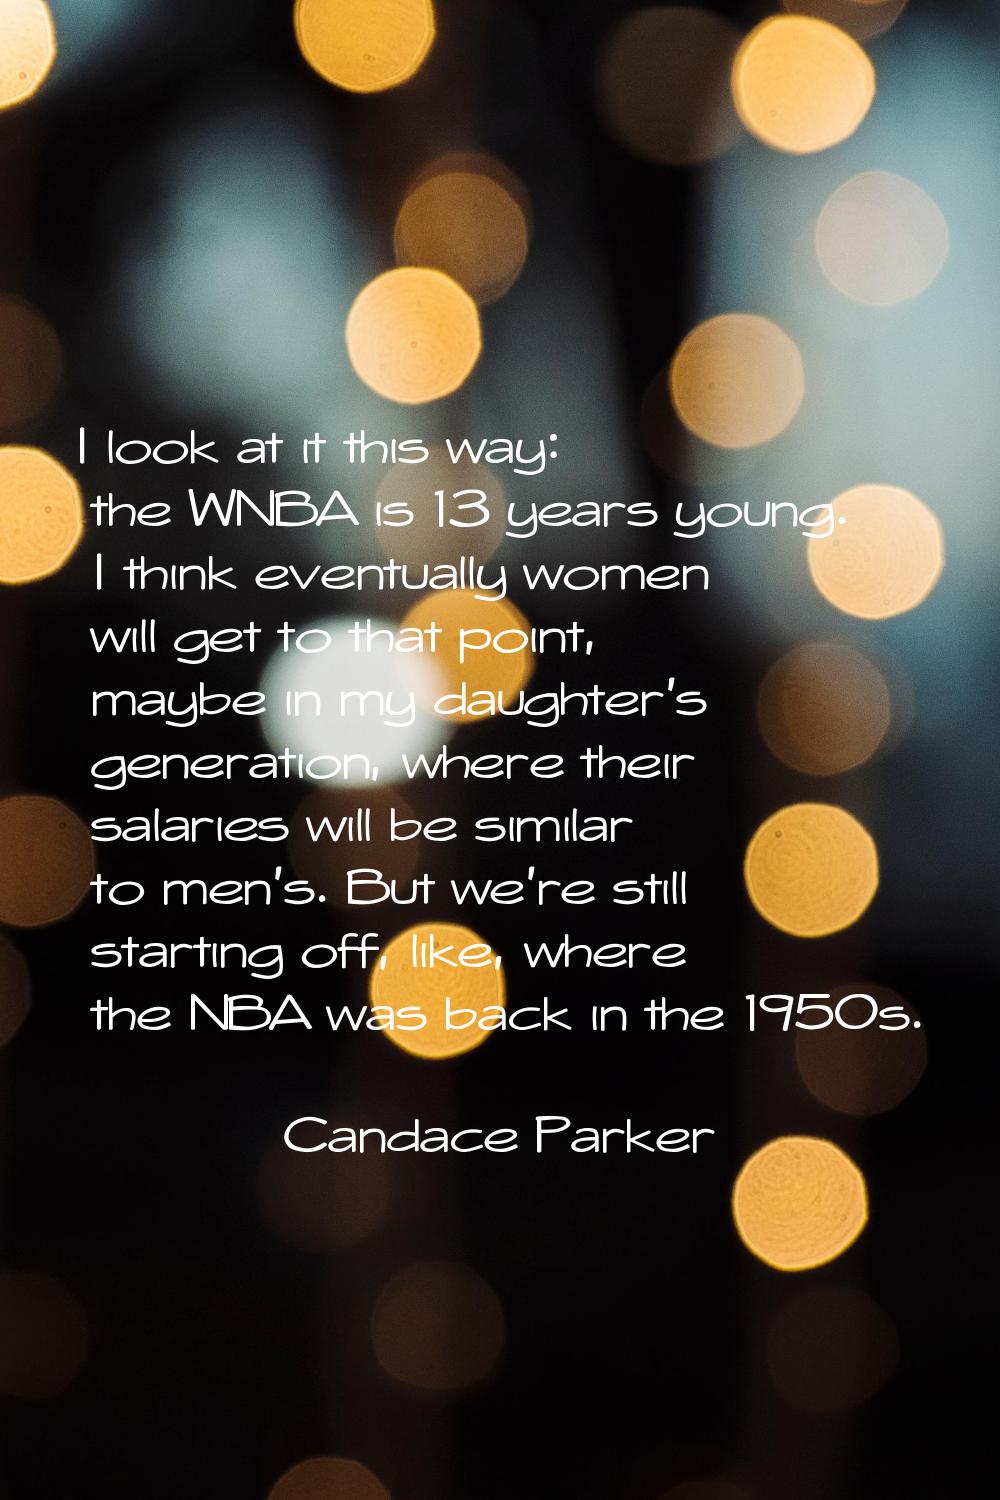 I look at it this way: the WNBA is 13 years young. I think eventually women will get to that point,